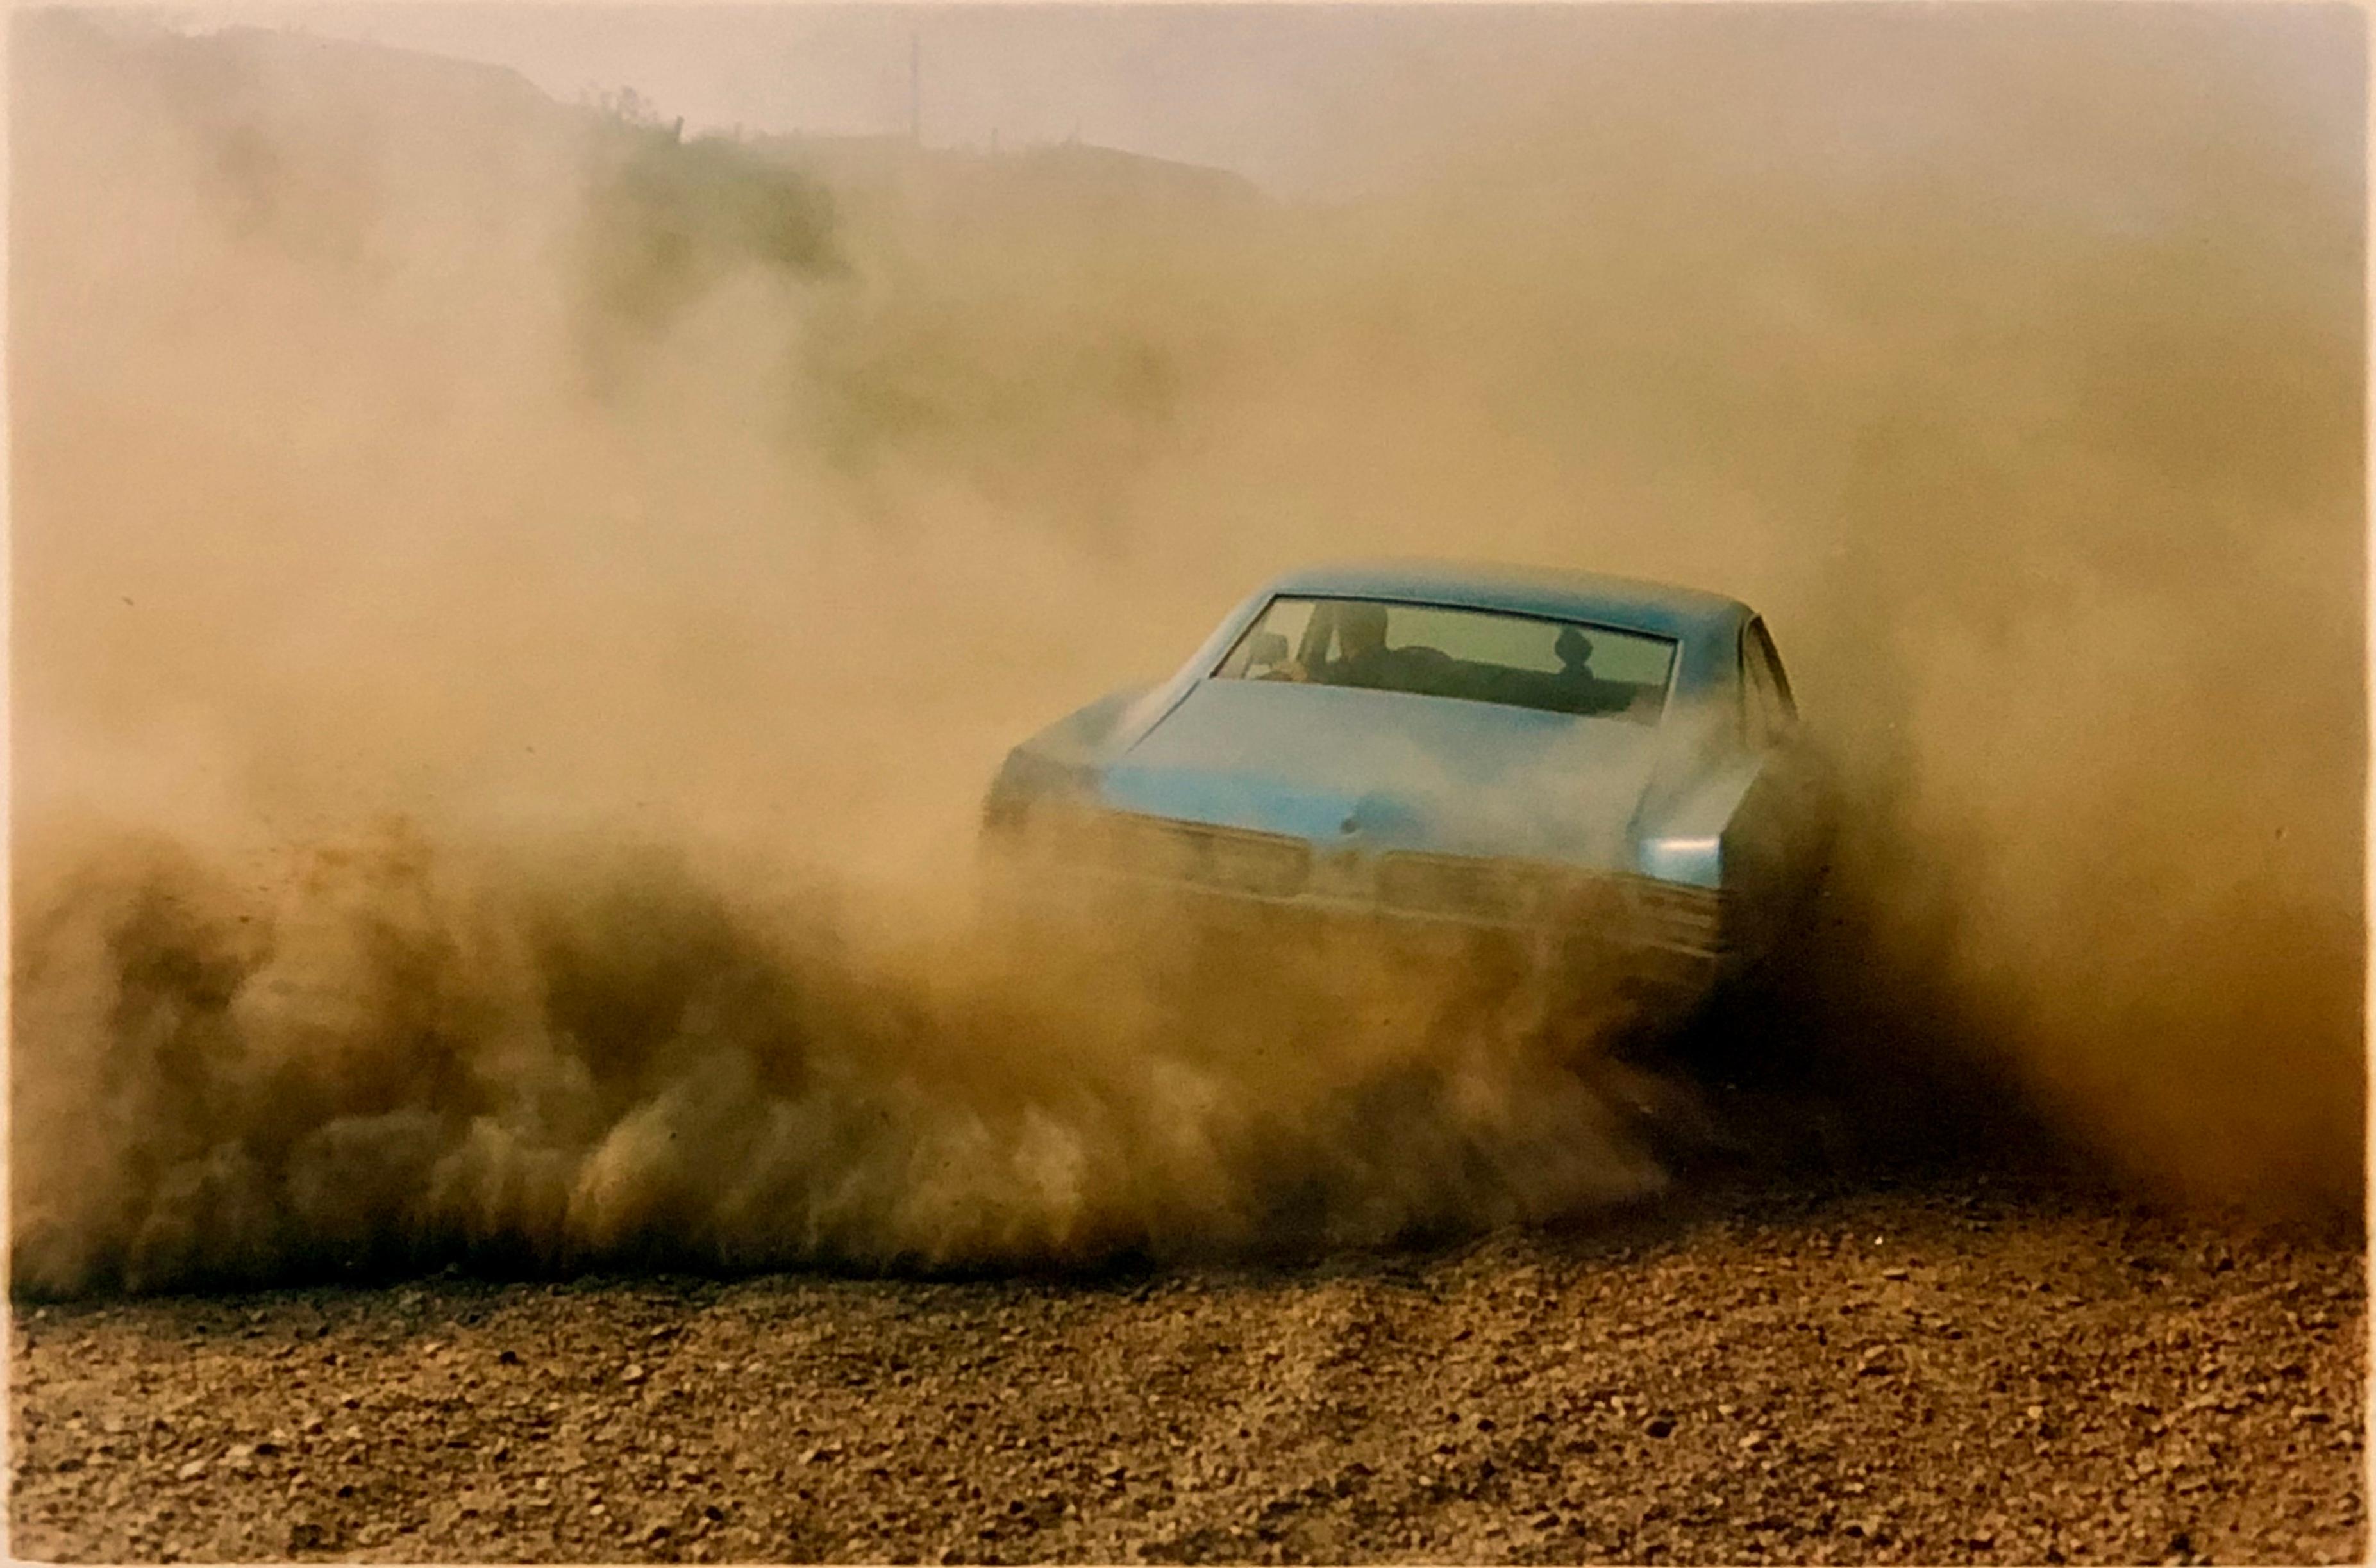 Buick in the Dust, features an American Car, on a British Beach (Hemsby, Norfolk) driven by a German. Richard spent years honing his skills as a drag racing photographer, a sport he loves which lead his photography career on some amazing journeys.